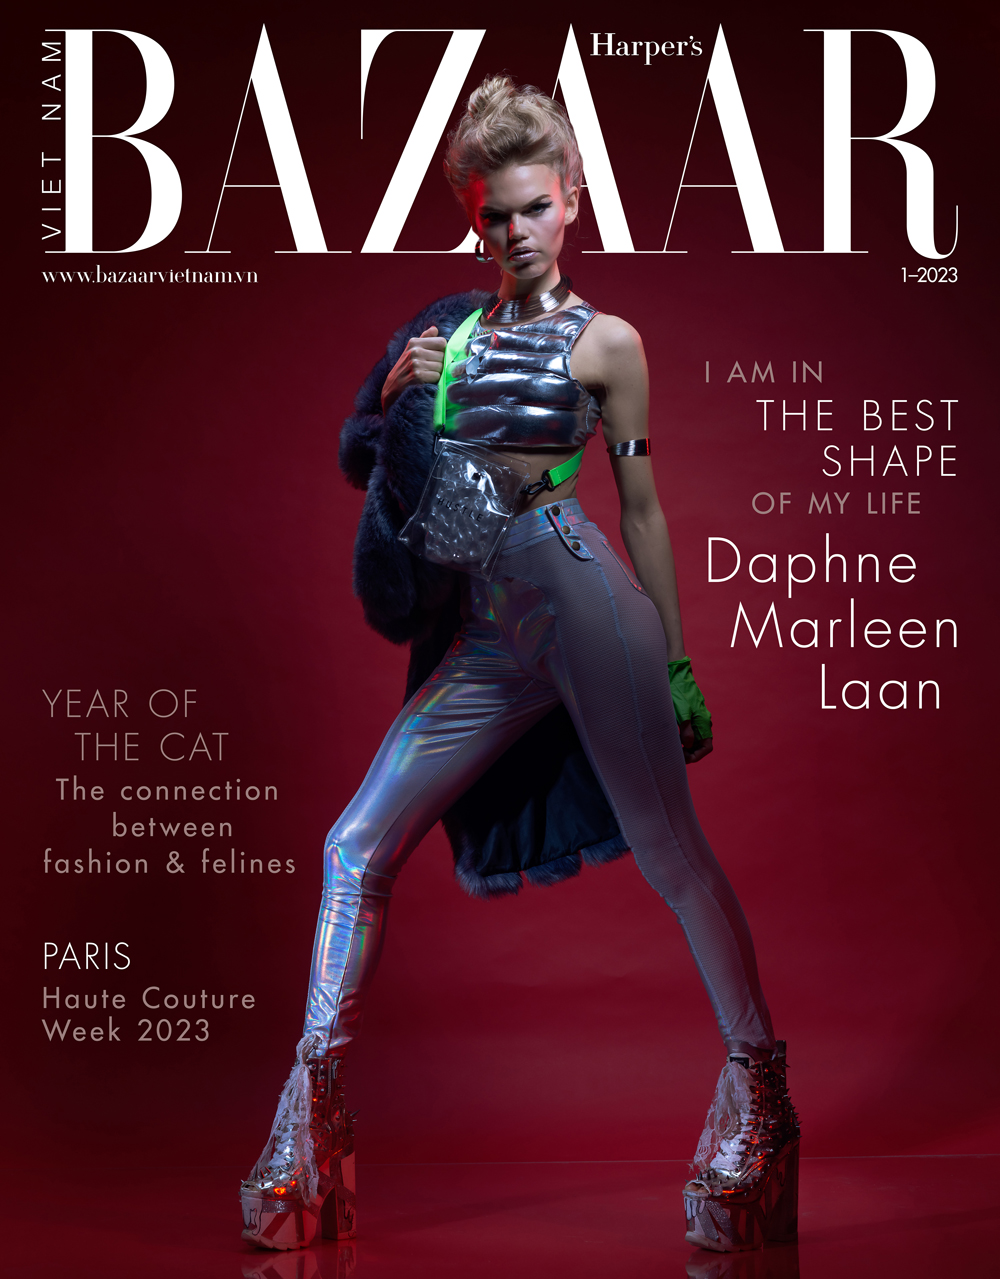 How did model Daphne Marleen Laan win her battle against cancer 1